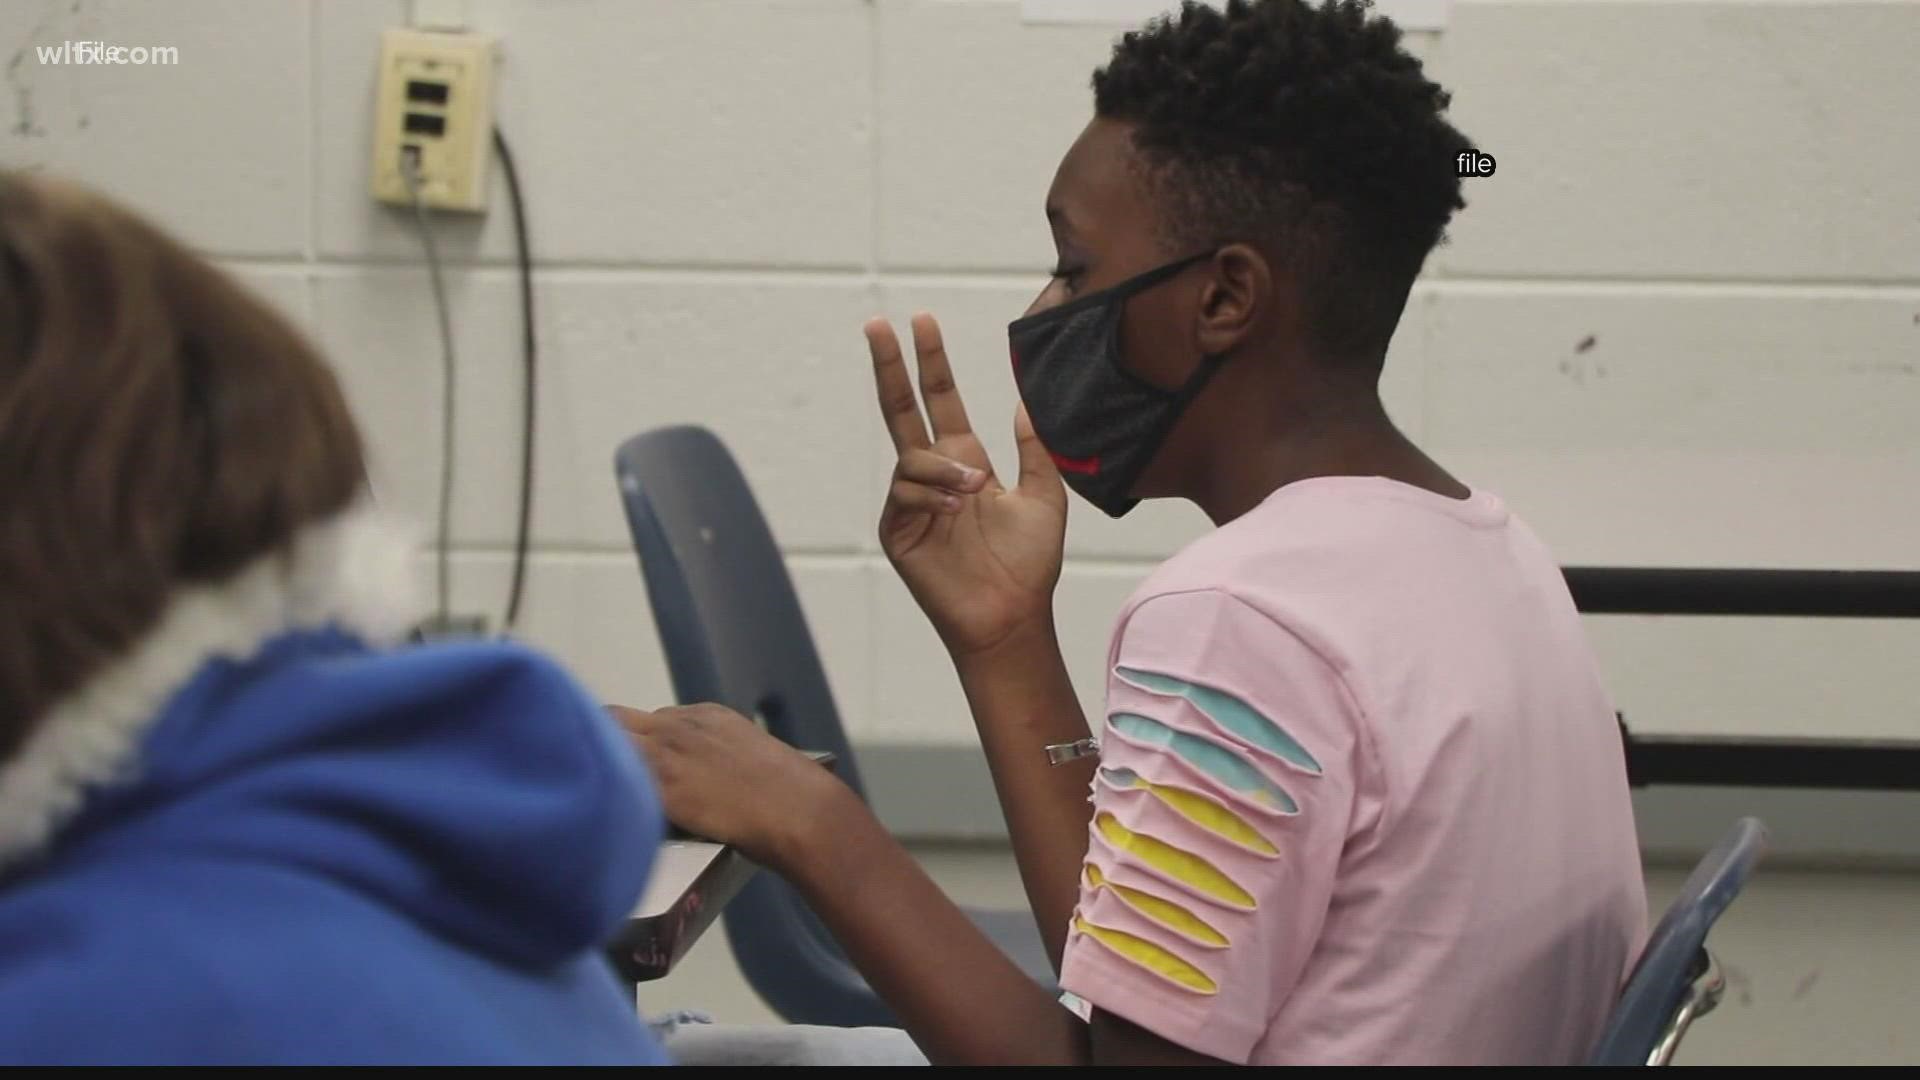 A federal district court on Tuesday granted the American Civil Liberties Union of South Carolina's request to block South Carolina's ban on mask mandates in schools.